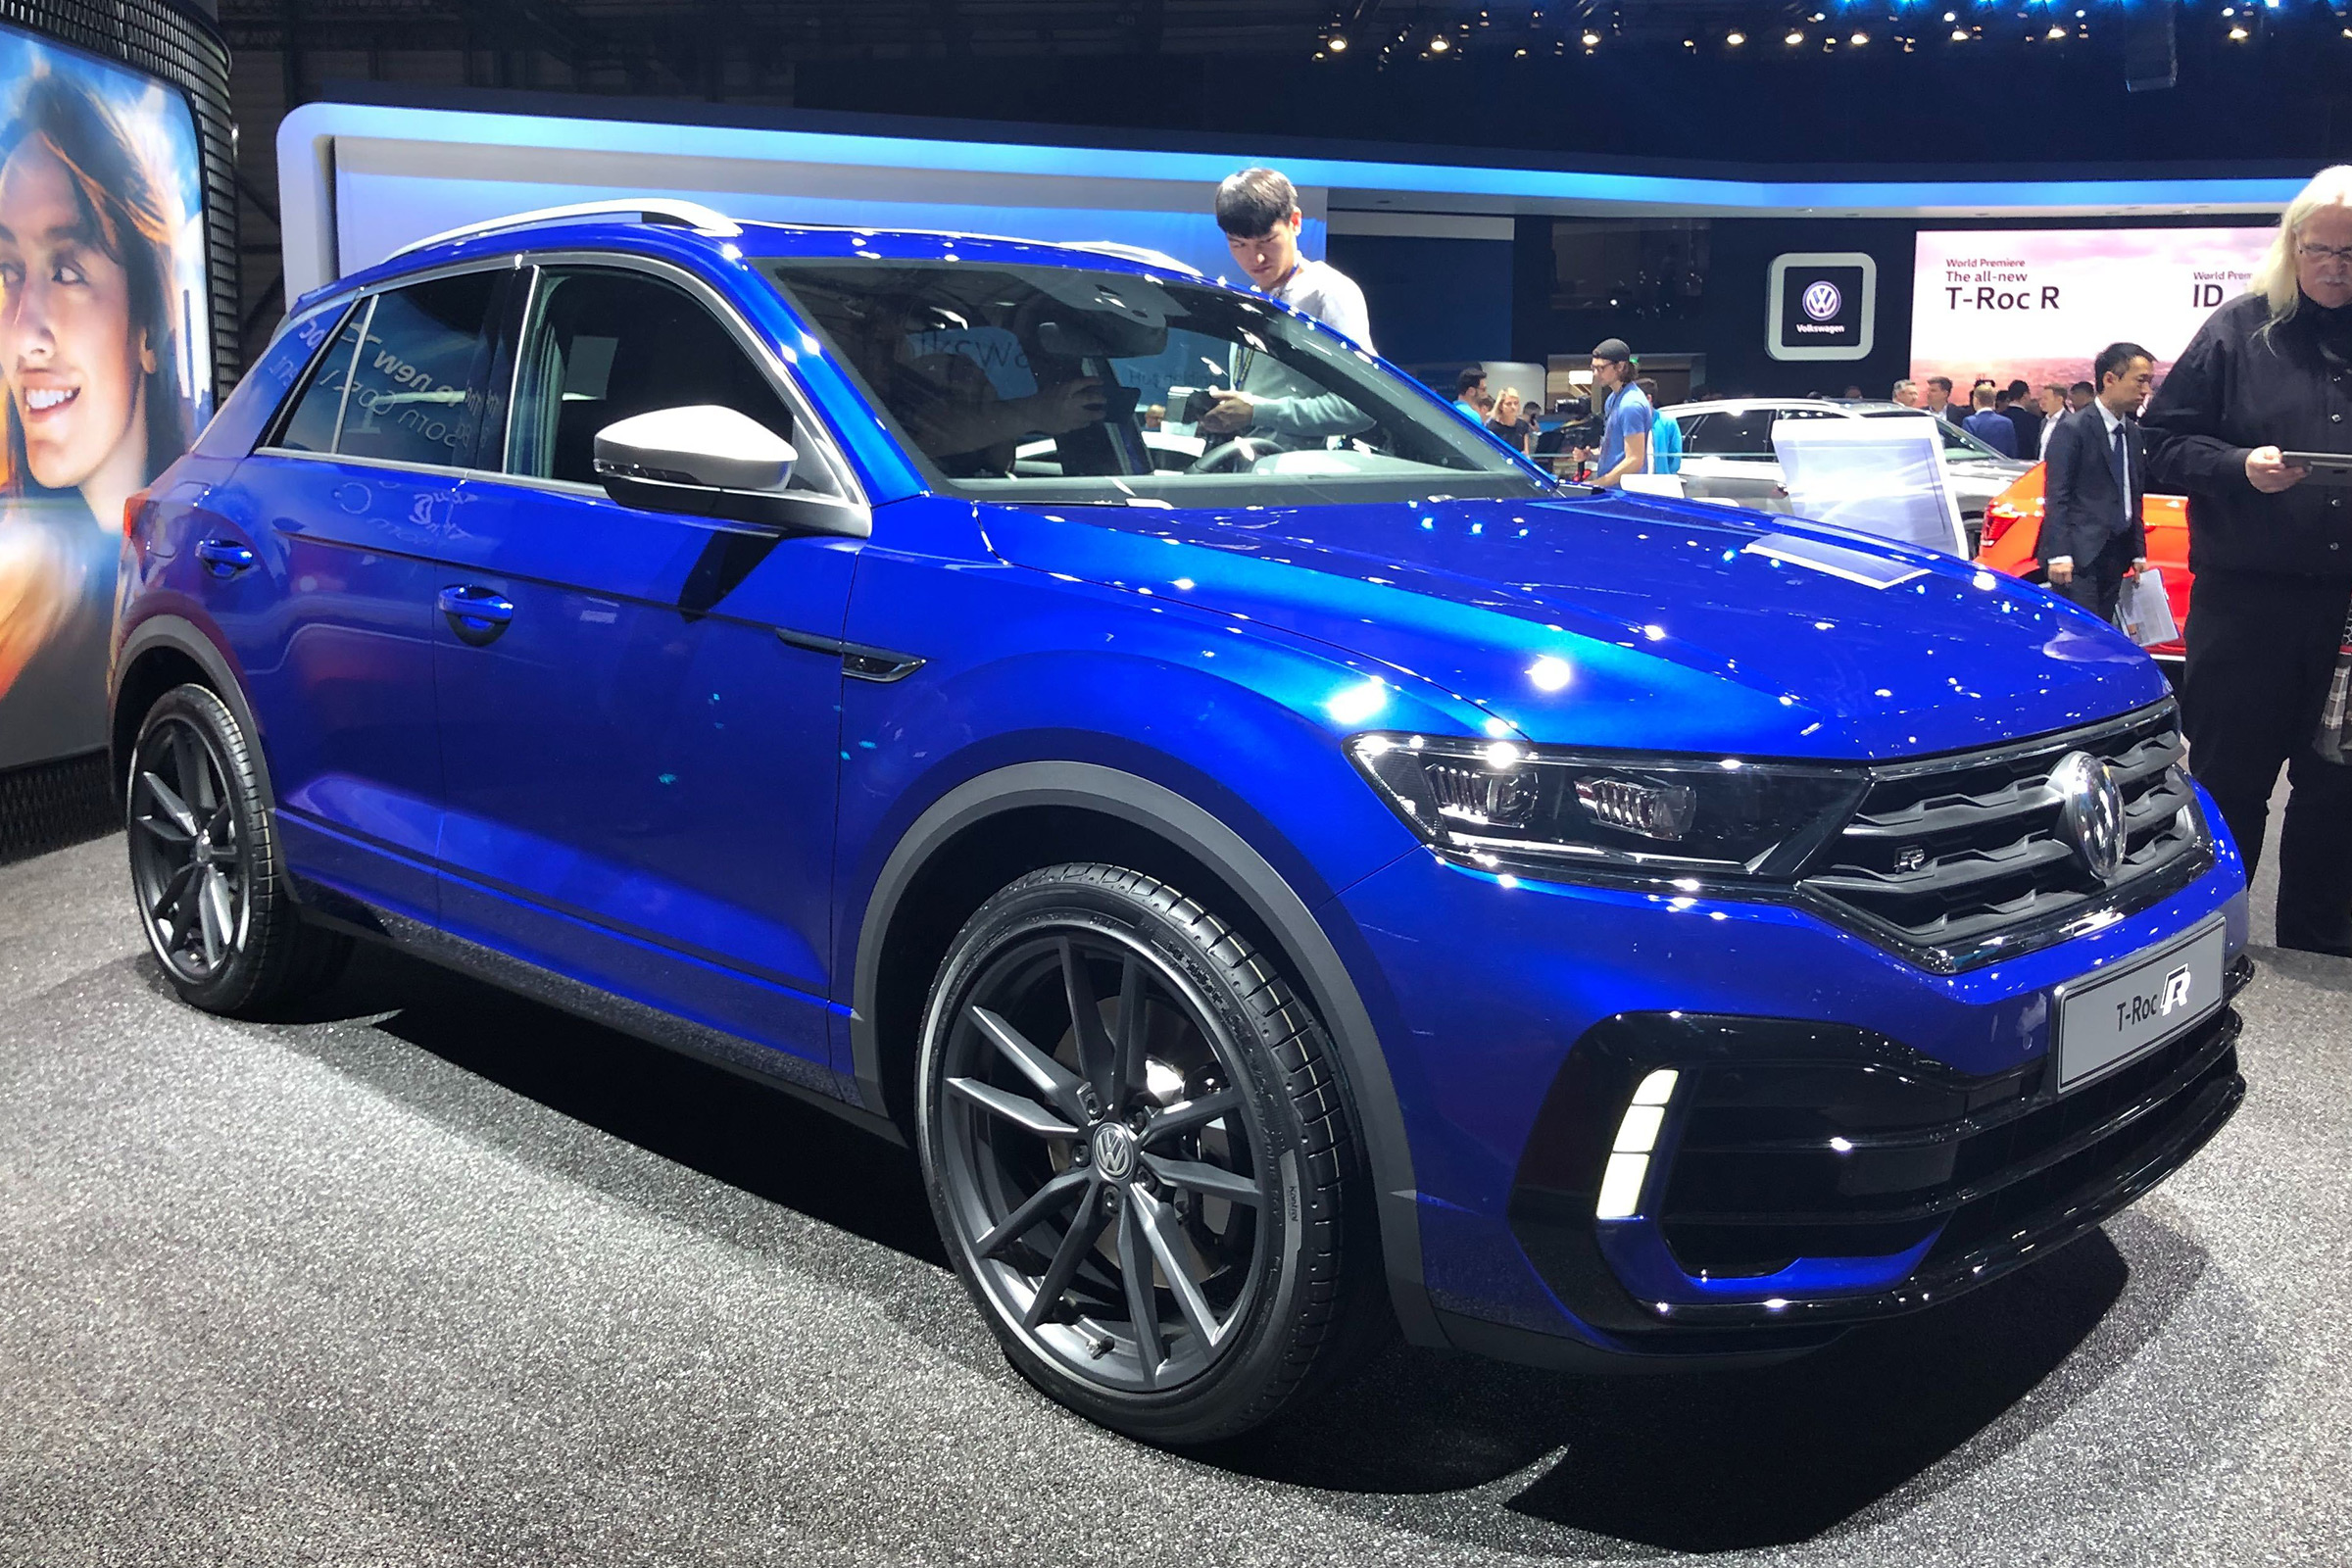 New Volkswagen T-Roc R gets 296bhp and £38k price tag 